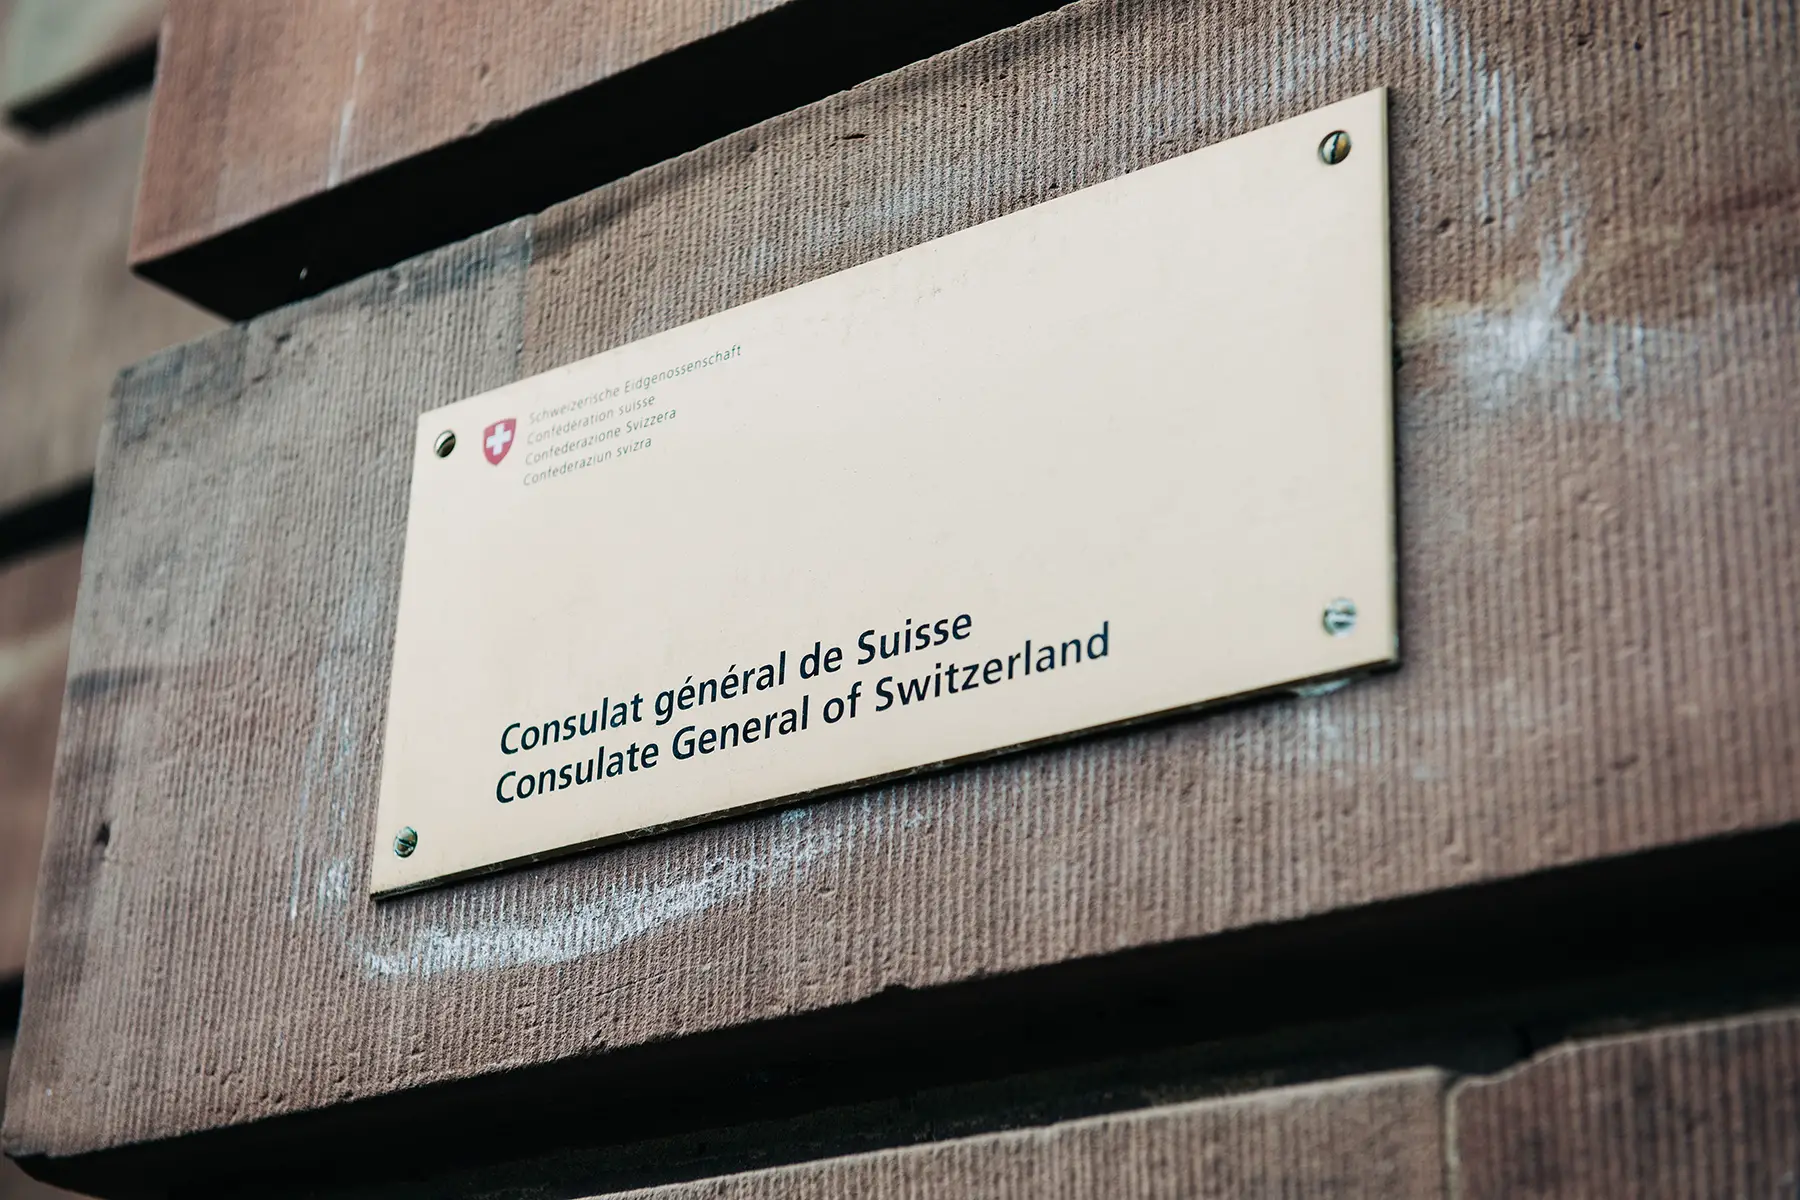 Sign in front of the Consulate General of Switzerland in Strasbourg